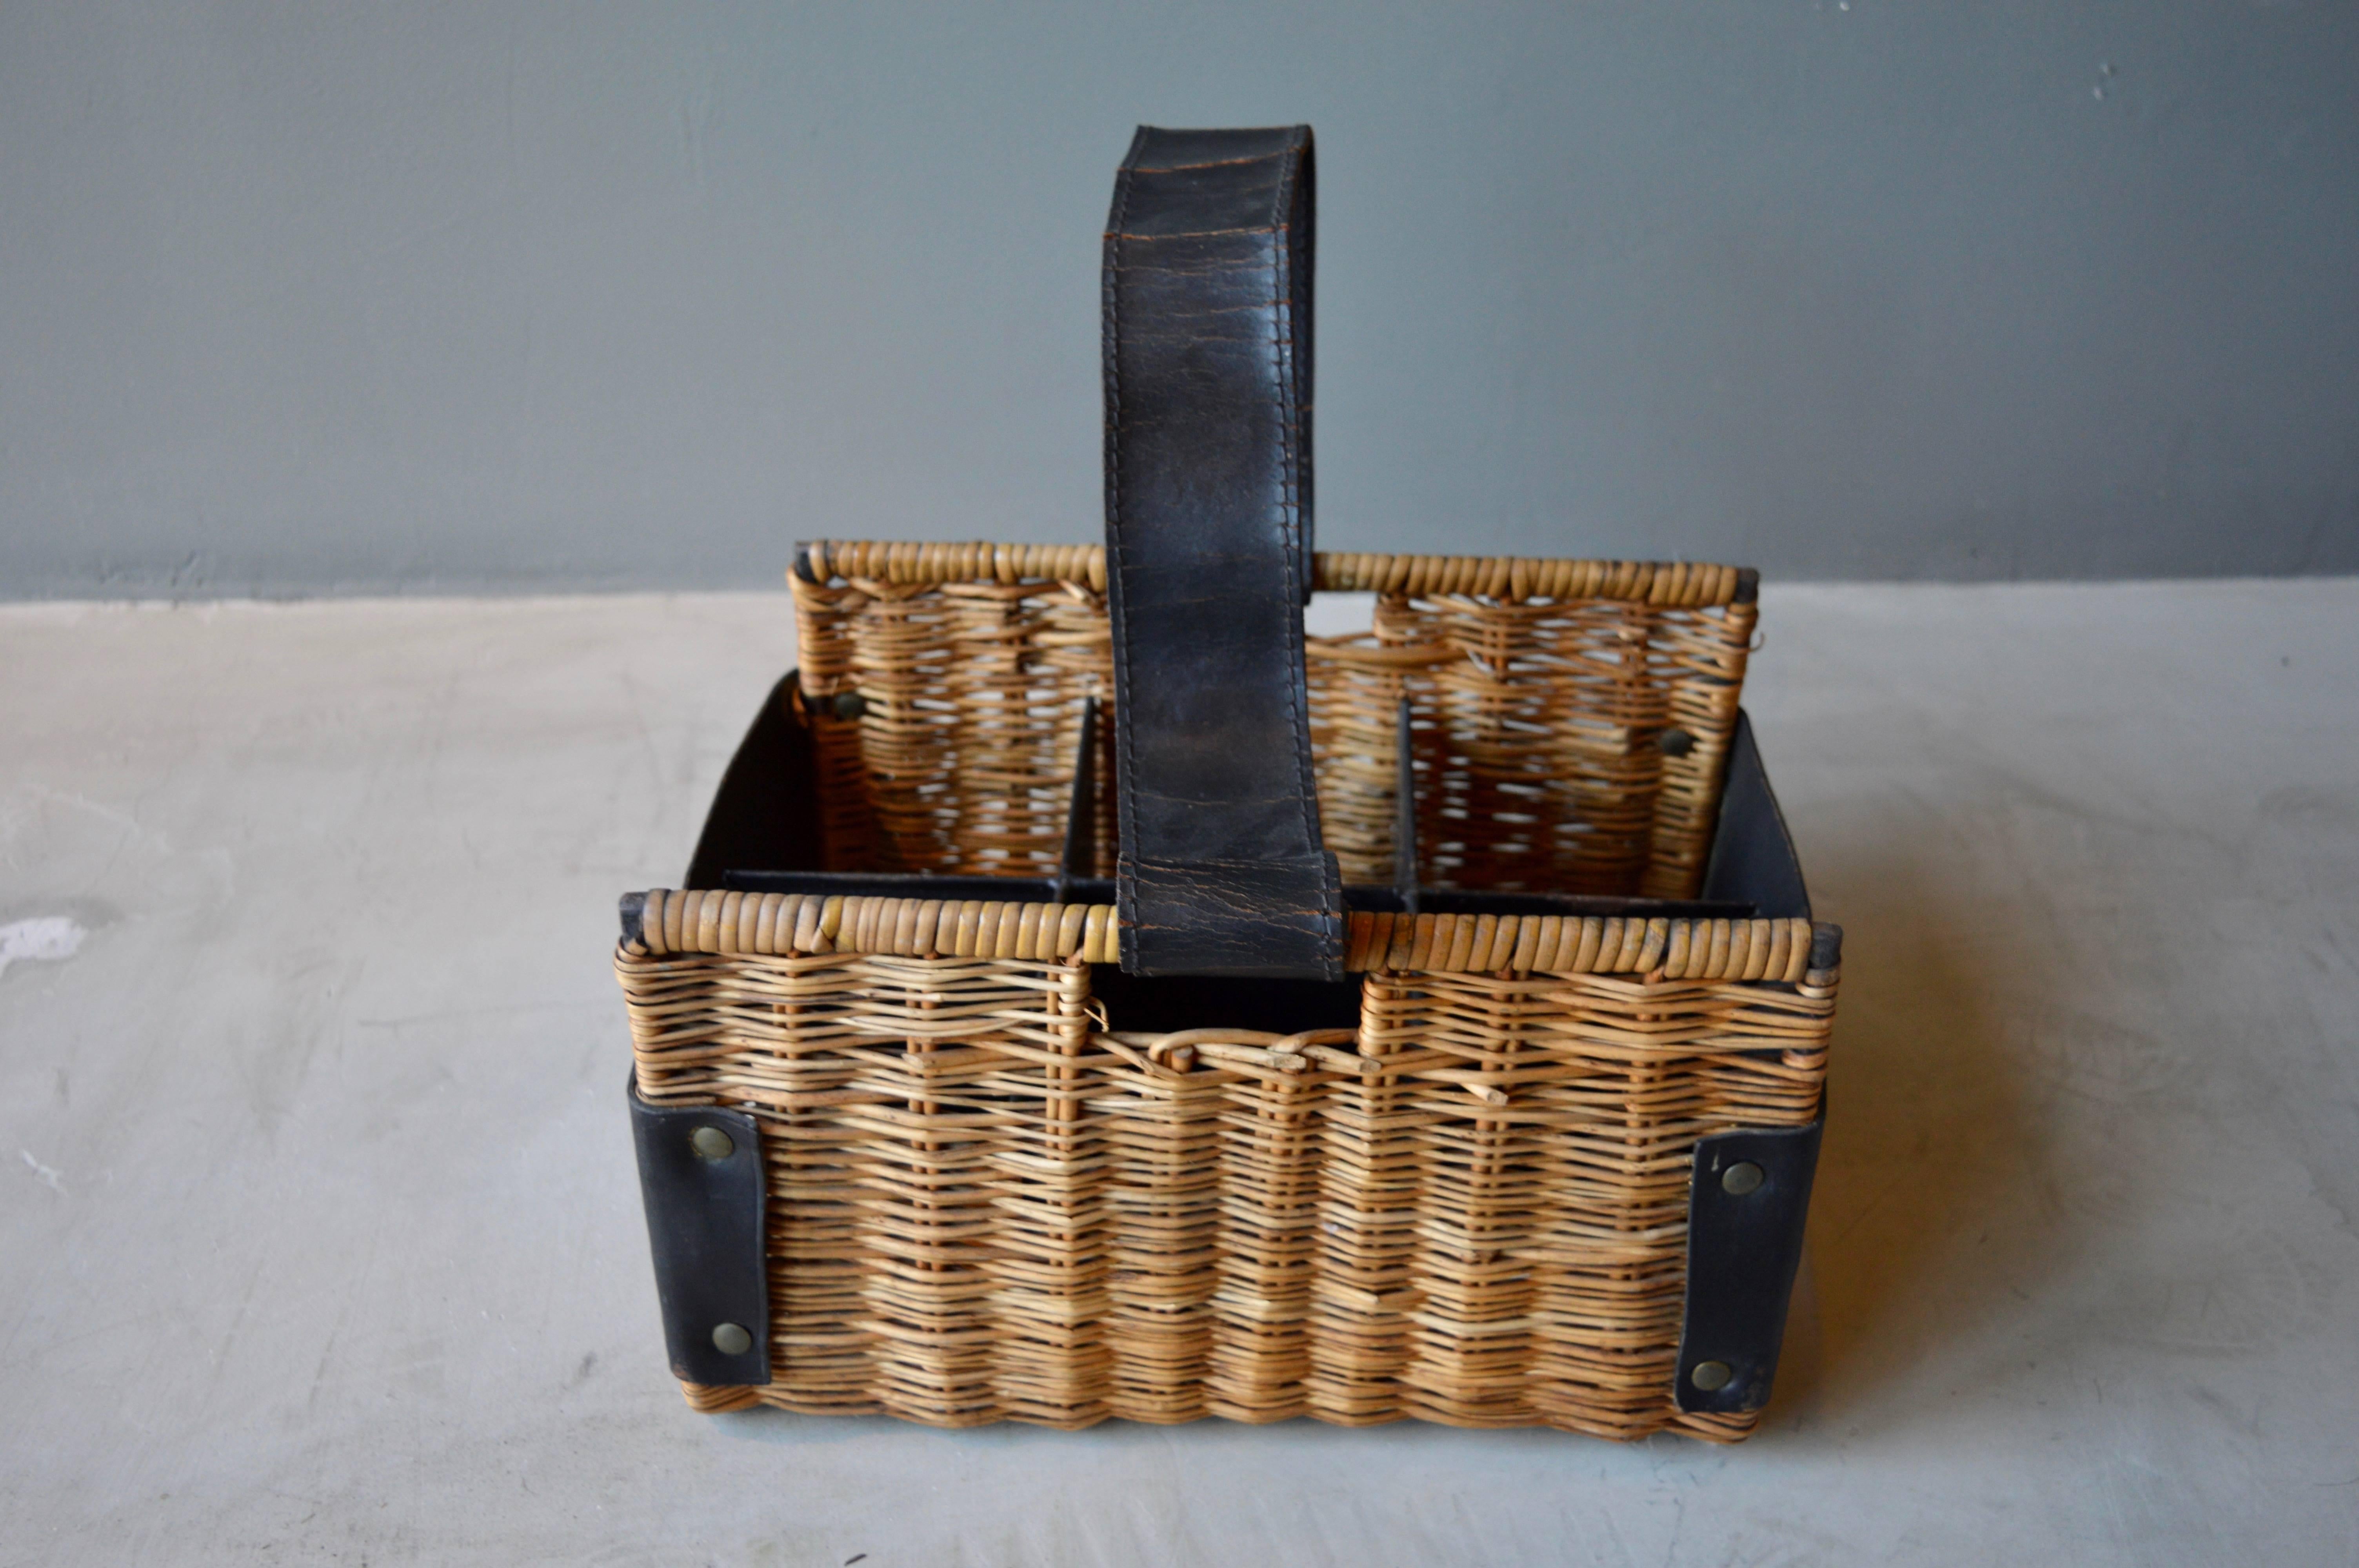 Handsome wine basket by French designer Jacques Adnet. Rattan in excellent vintage condition. Leather in good vintage condition. Very unique piece.